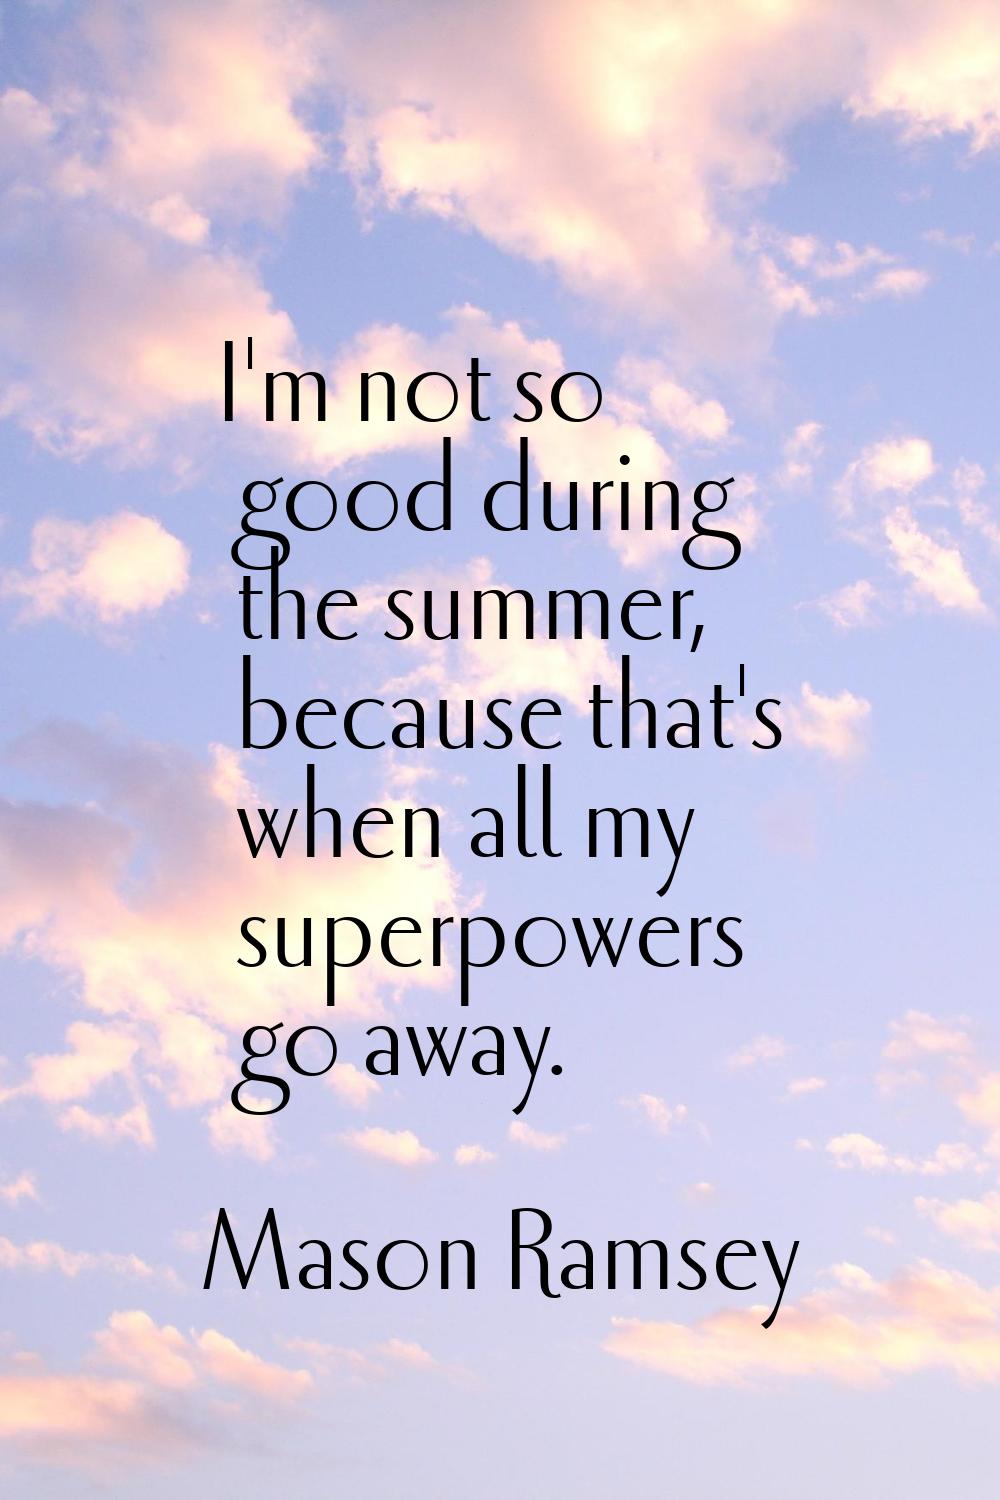 I'm not so good during the summer, because that's when all my superpowers go away.